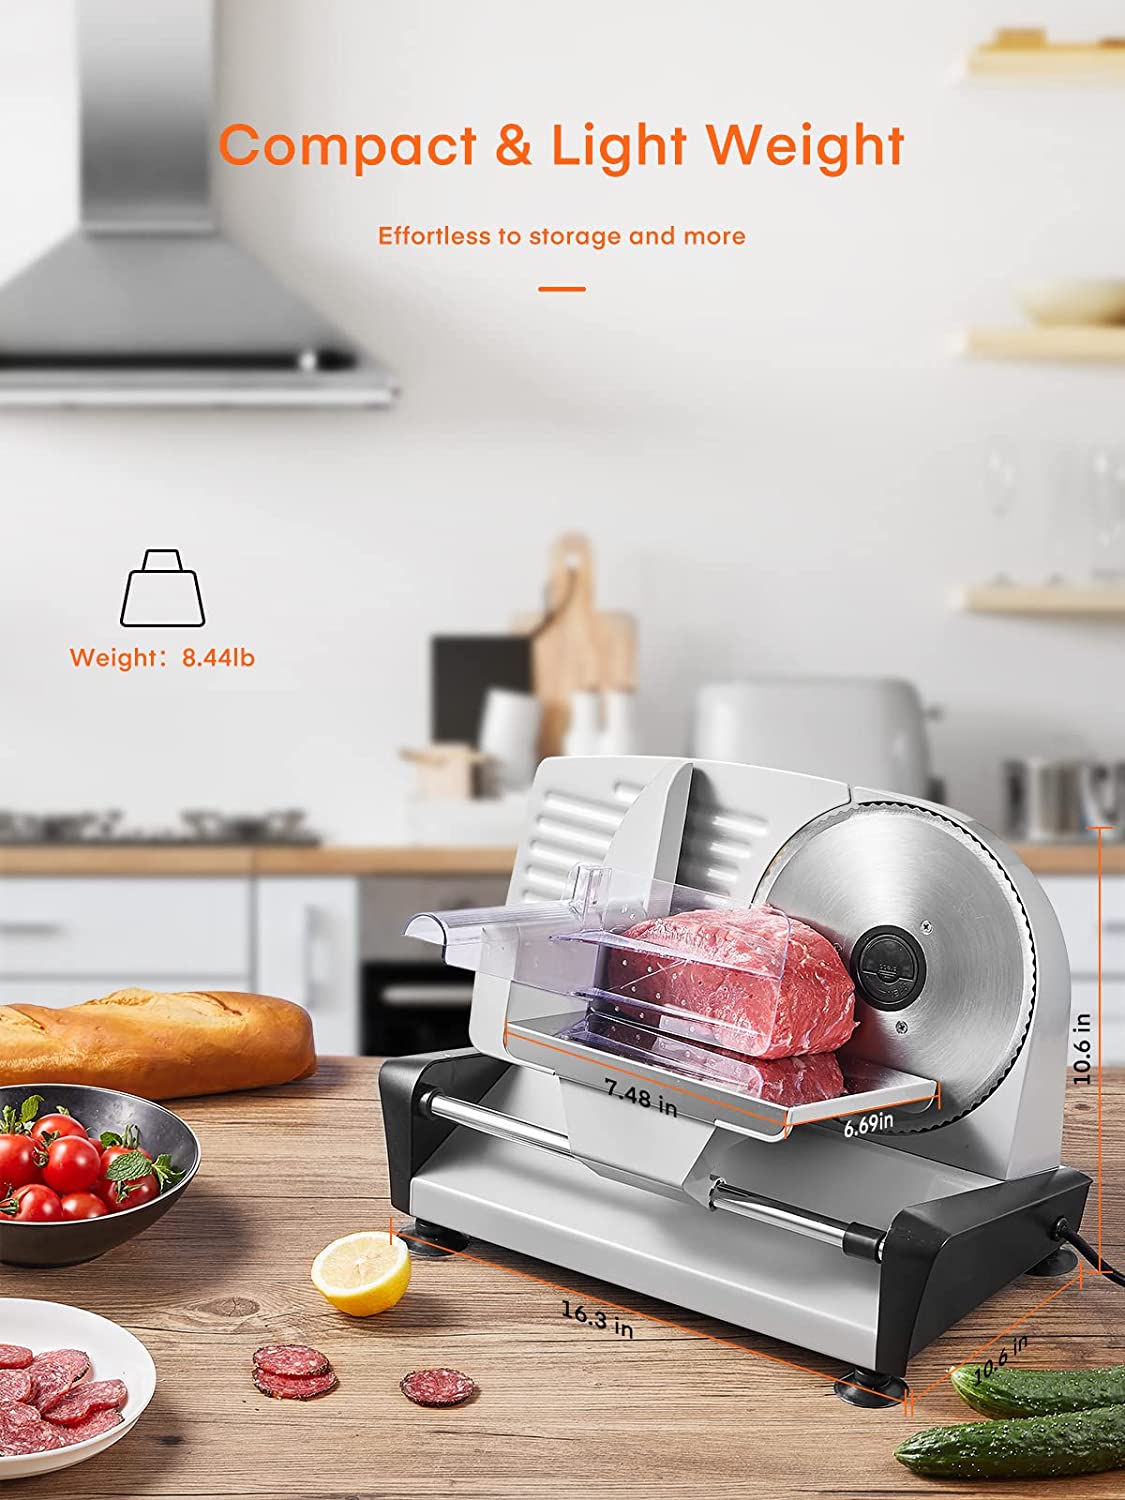 compact and light weight, Meat Slicer For Home Use, Housnat Kitchen Pro Electric Deli & Food Slicer with 0-15mm Adjustable Thickness and 7.5" Stainless Steel Blade Cuts Meat, Cheese, Bread, Include Food Pusher, 150W